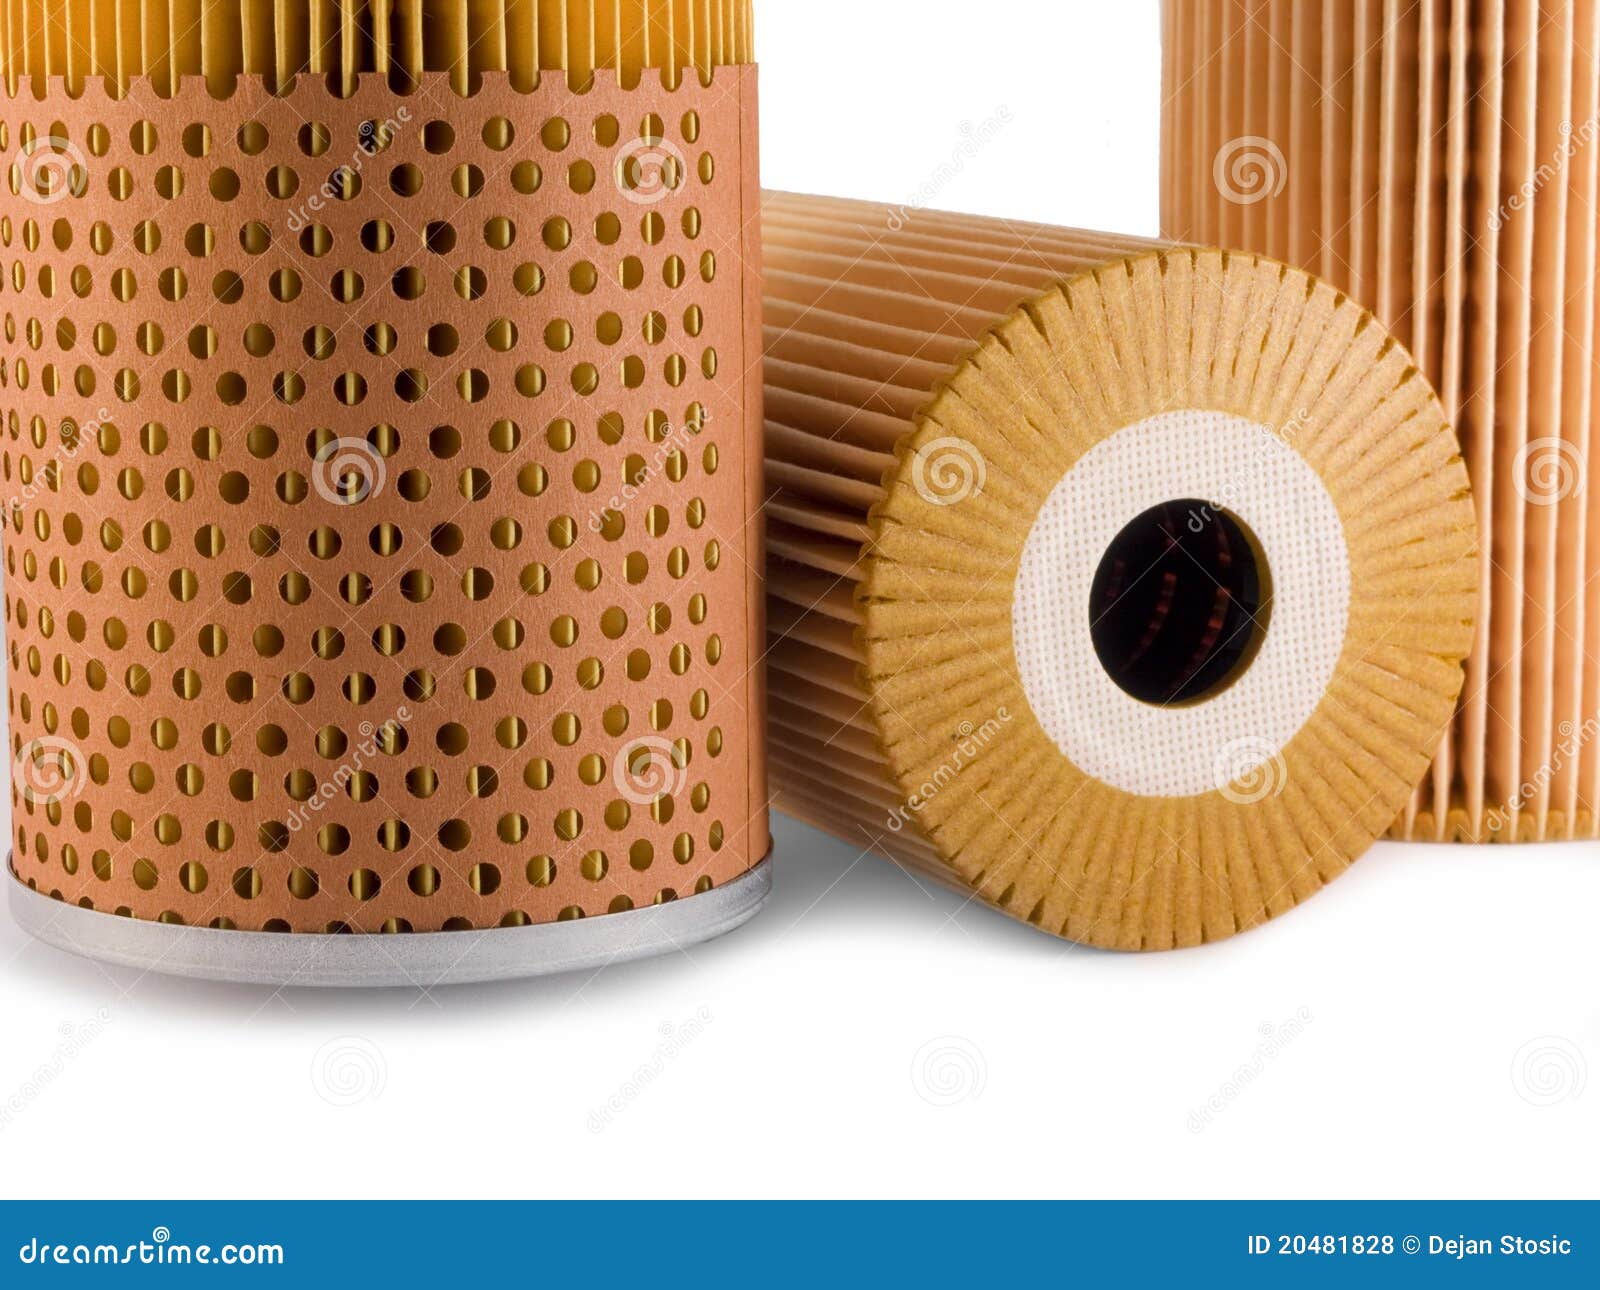 oil filters